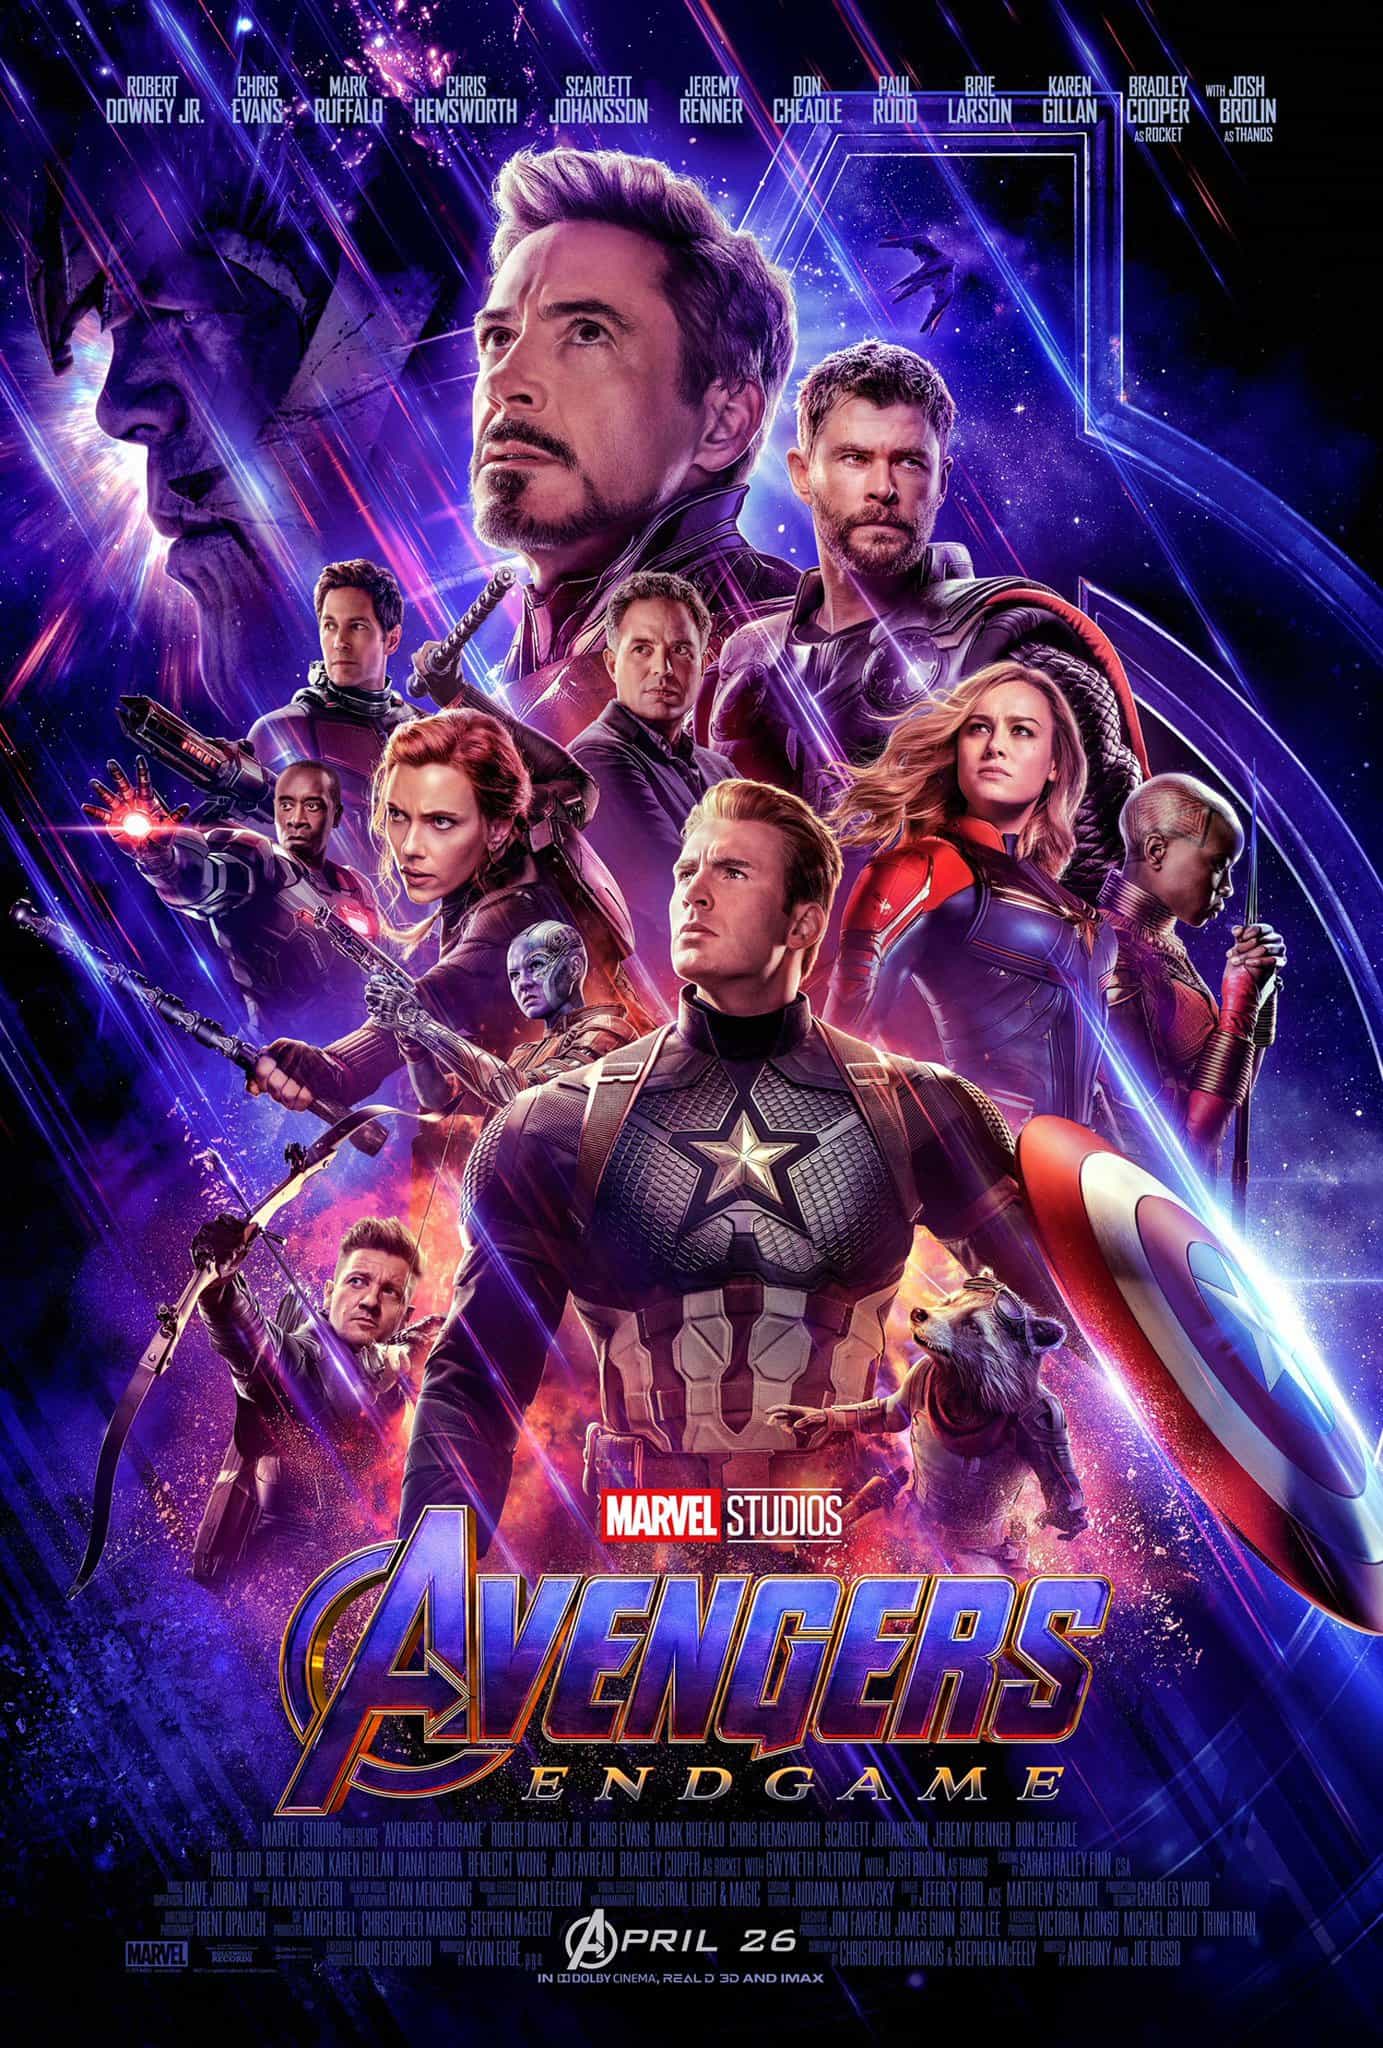 First trailer and poster for Avengers 4, officially titled Avengers Endgame, new release date April 26 2019